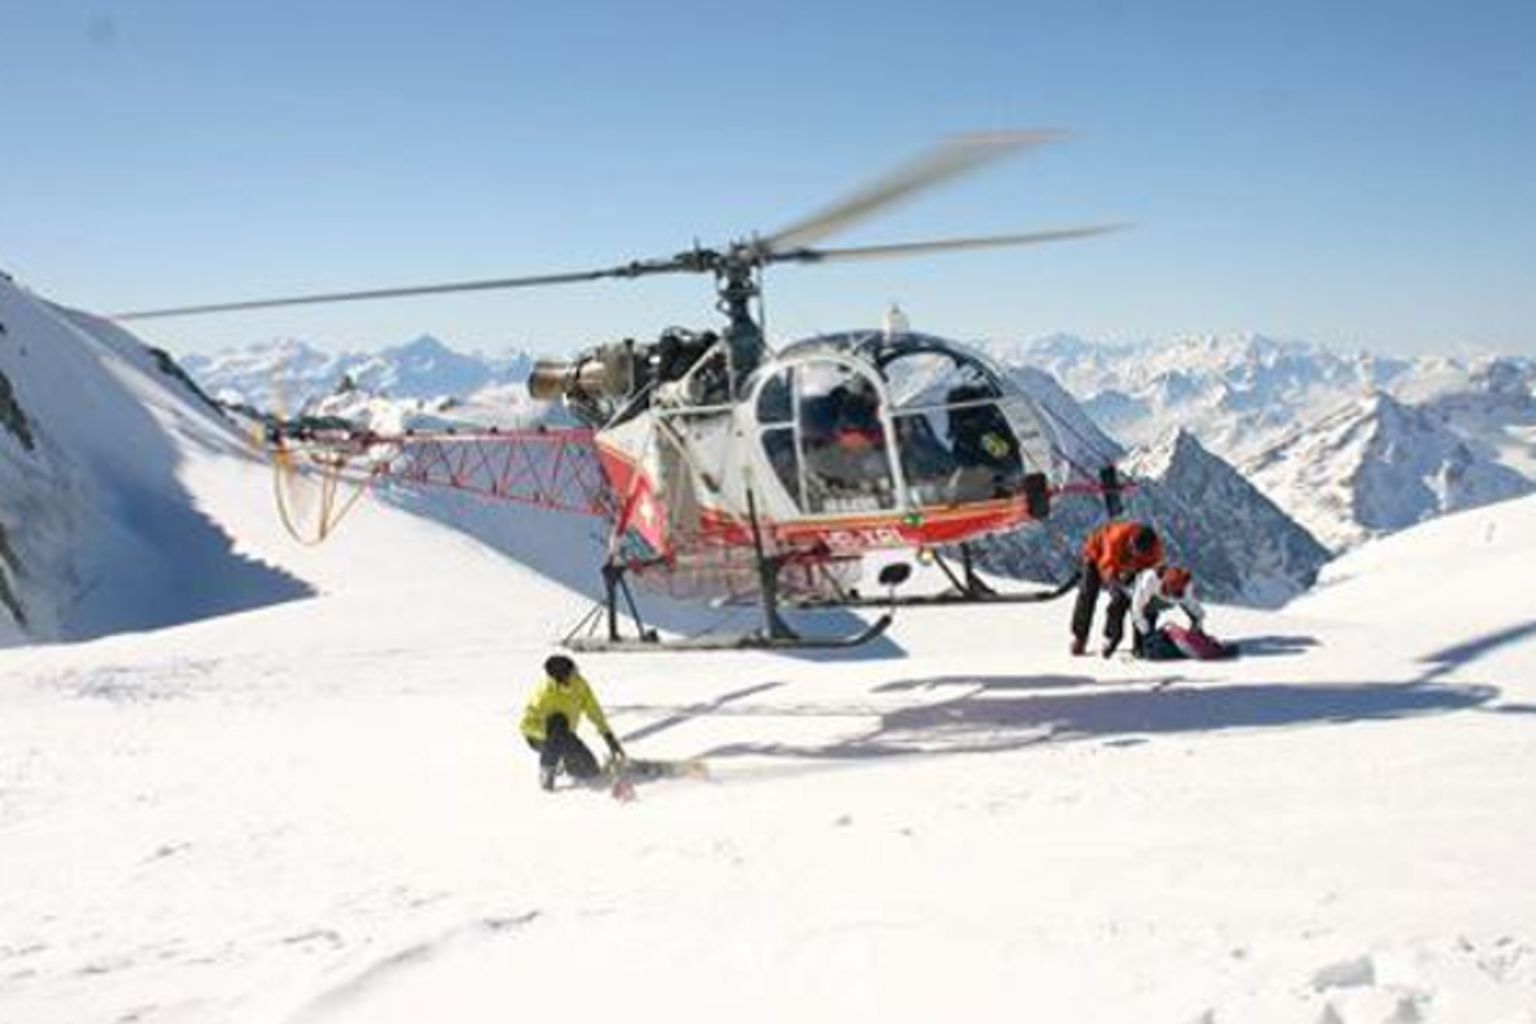 AlpEmotion organizes your outdoor holidays and escorts you in Valais, Valais